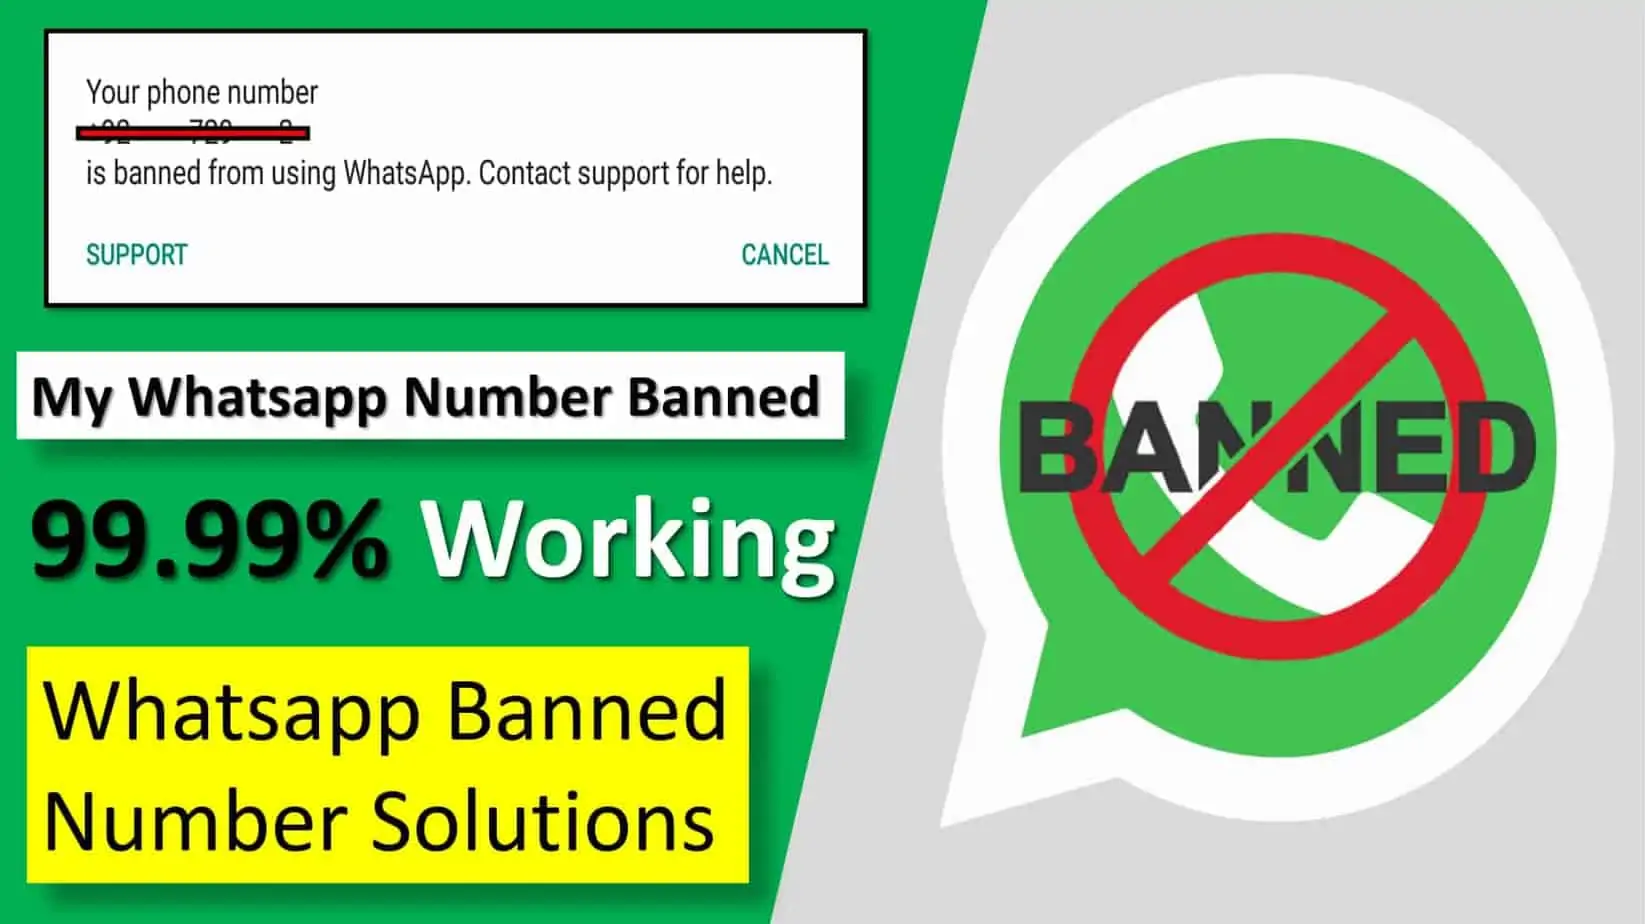 how can i activate my banned whatsapp number?, how can i continue using my banned number on whatsapp, whatsapp banned solved, how to activate banned whatsapp number, how can i continue using my banned number on whatsapp, how to remove whatsapp banned 2020, my whatsapp number is banned how to unbanned, how to reactivate banned whatsapp, permanently banned from whatsapp, how to remove whatsapp banned 2020, how to banned someone whatsapp number, how to unbanned whatsapp number 2020, whatsapp banned my number